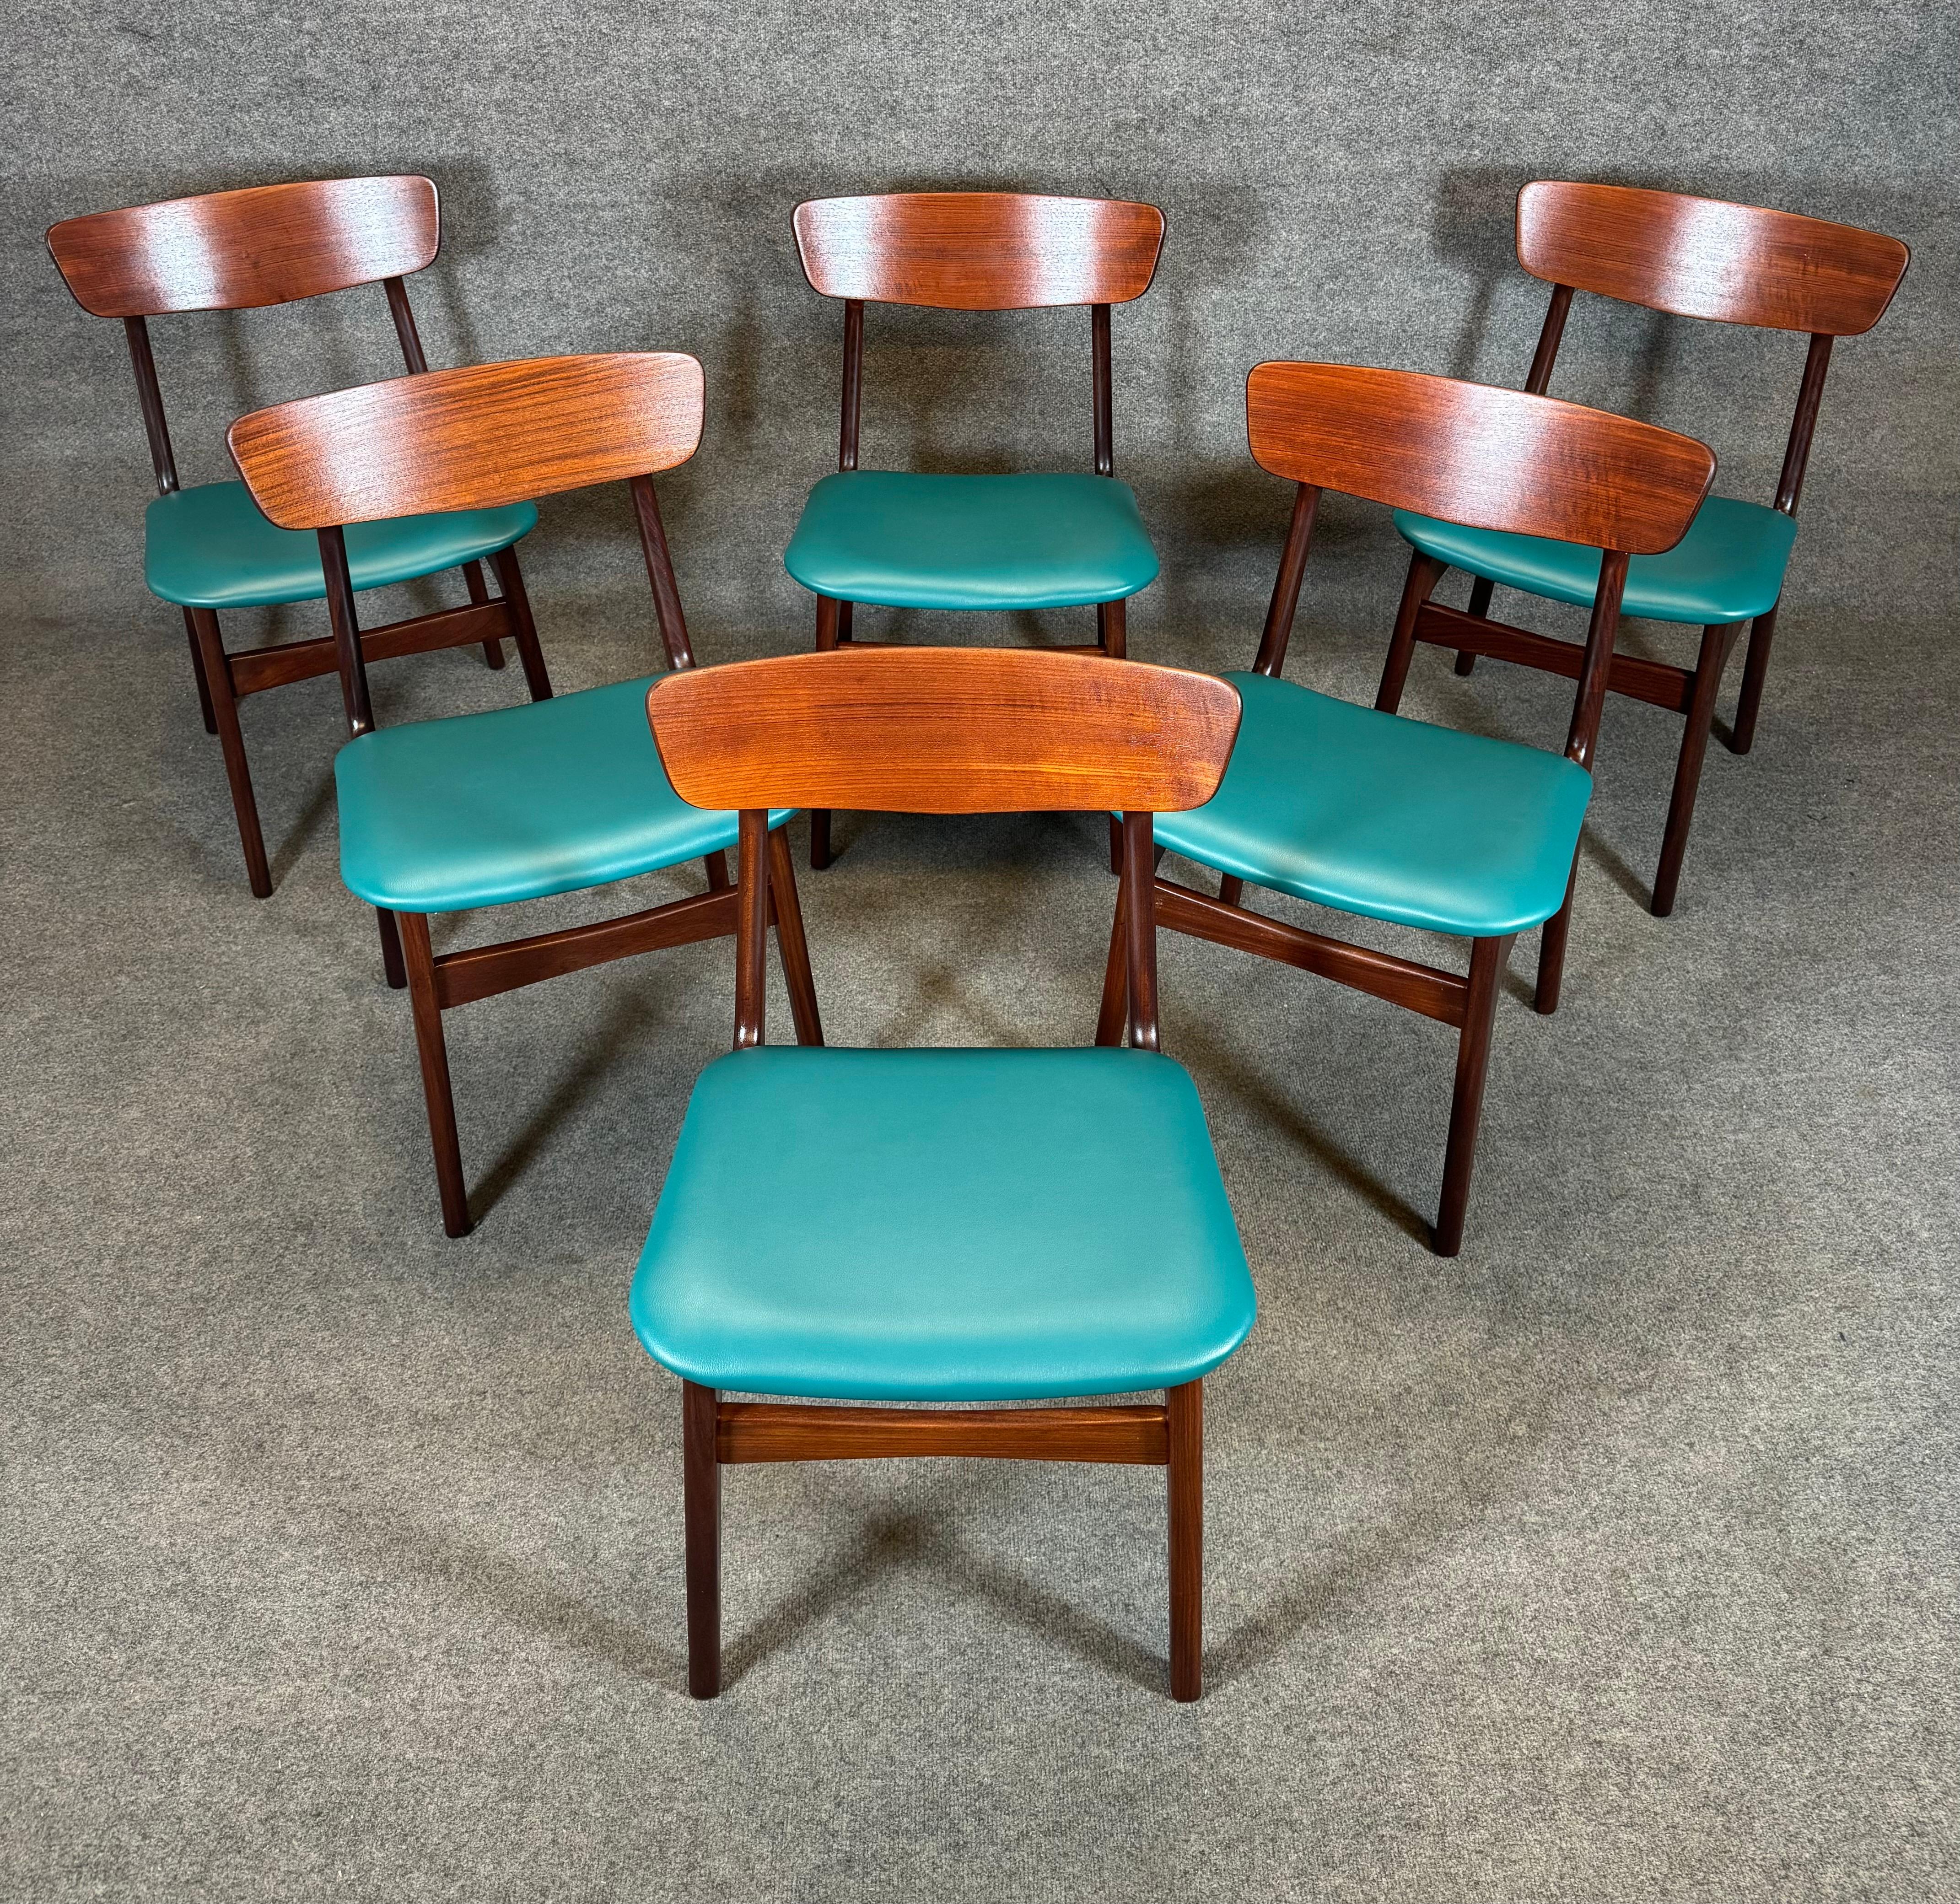 Here is beautiful set of six scandinavian modern dining chairs in teak designed by Schønning & Elgaard and manufcatuyred by Randers Mobelfabrik in Denmark in the 1960's.
This exquisite set, recently imported from Europe to California before its